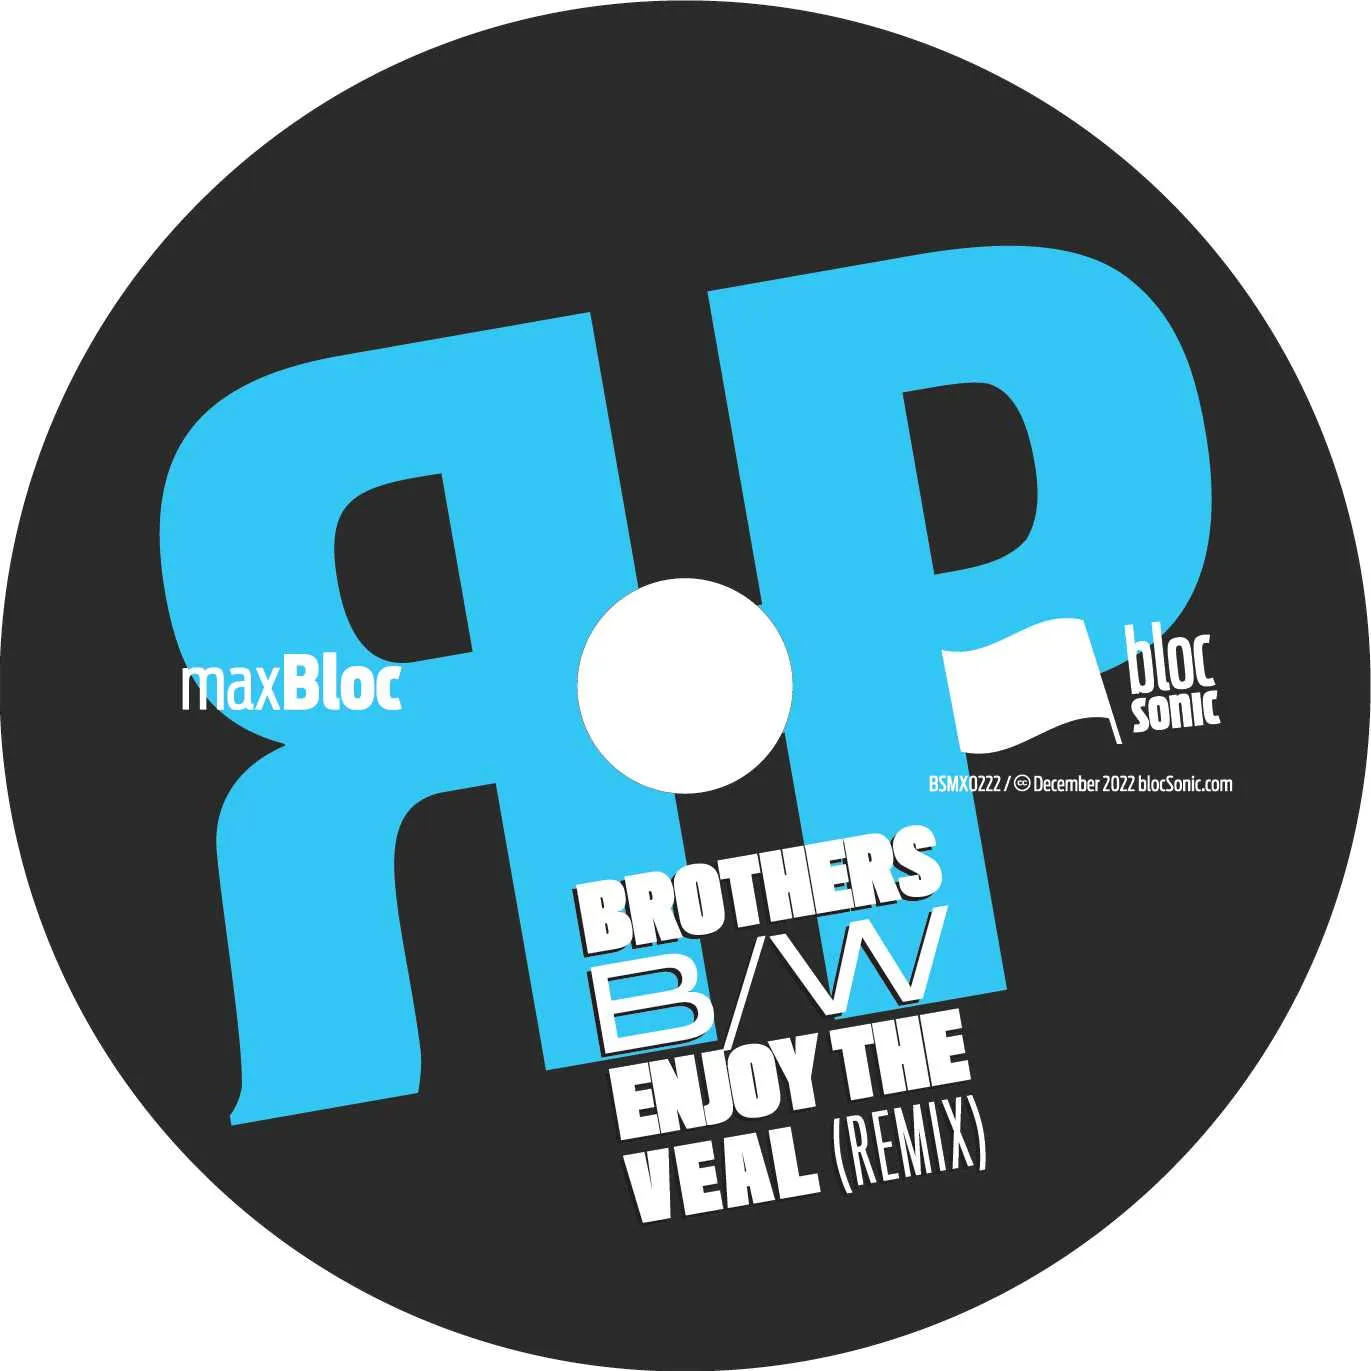 Album disc for “Brothers B/W Enjoy The Veal (Remix)” by Regenerated Headpiece